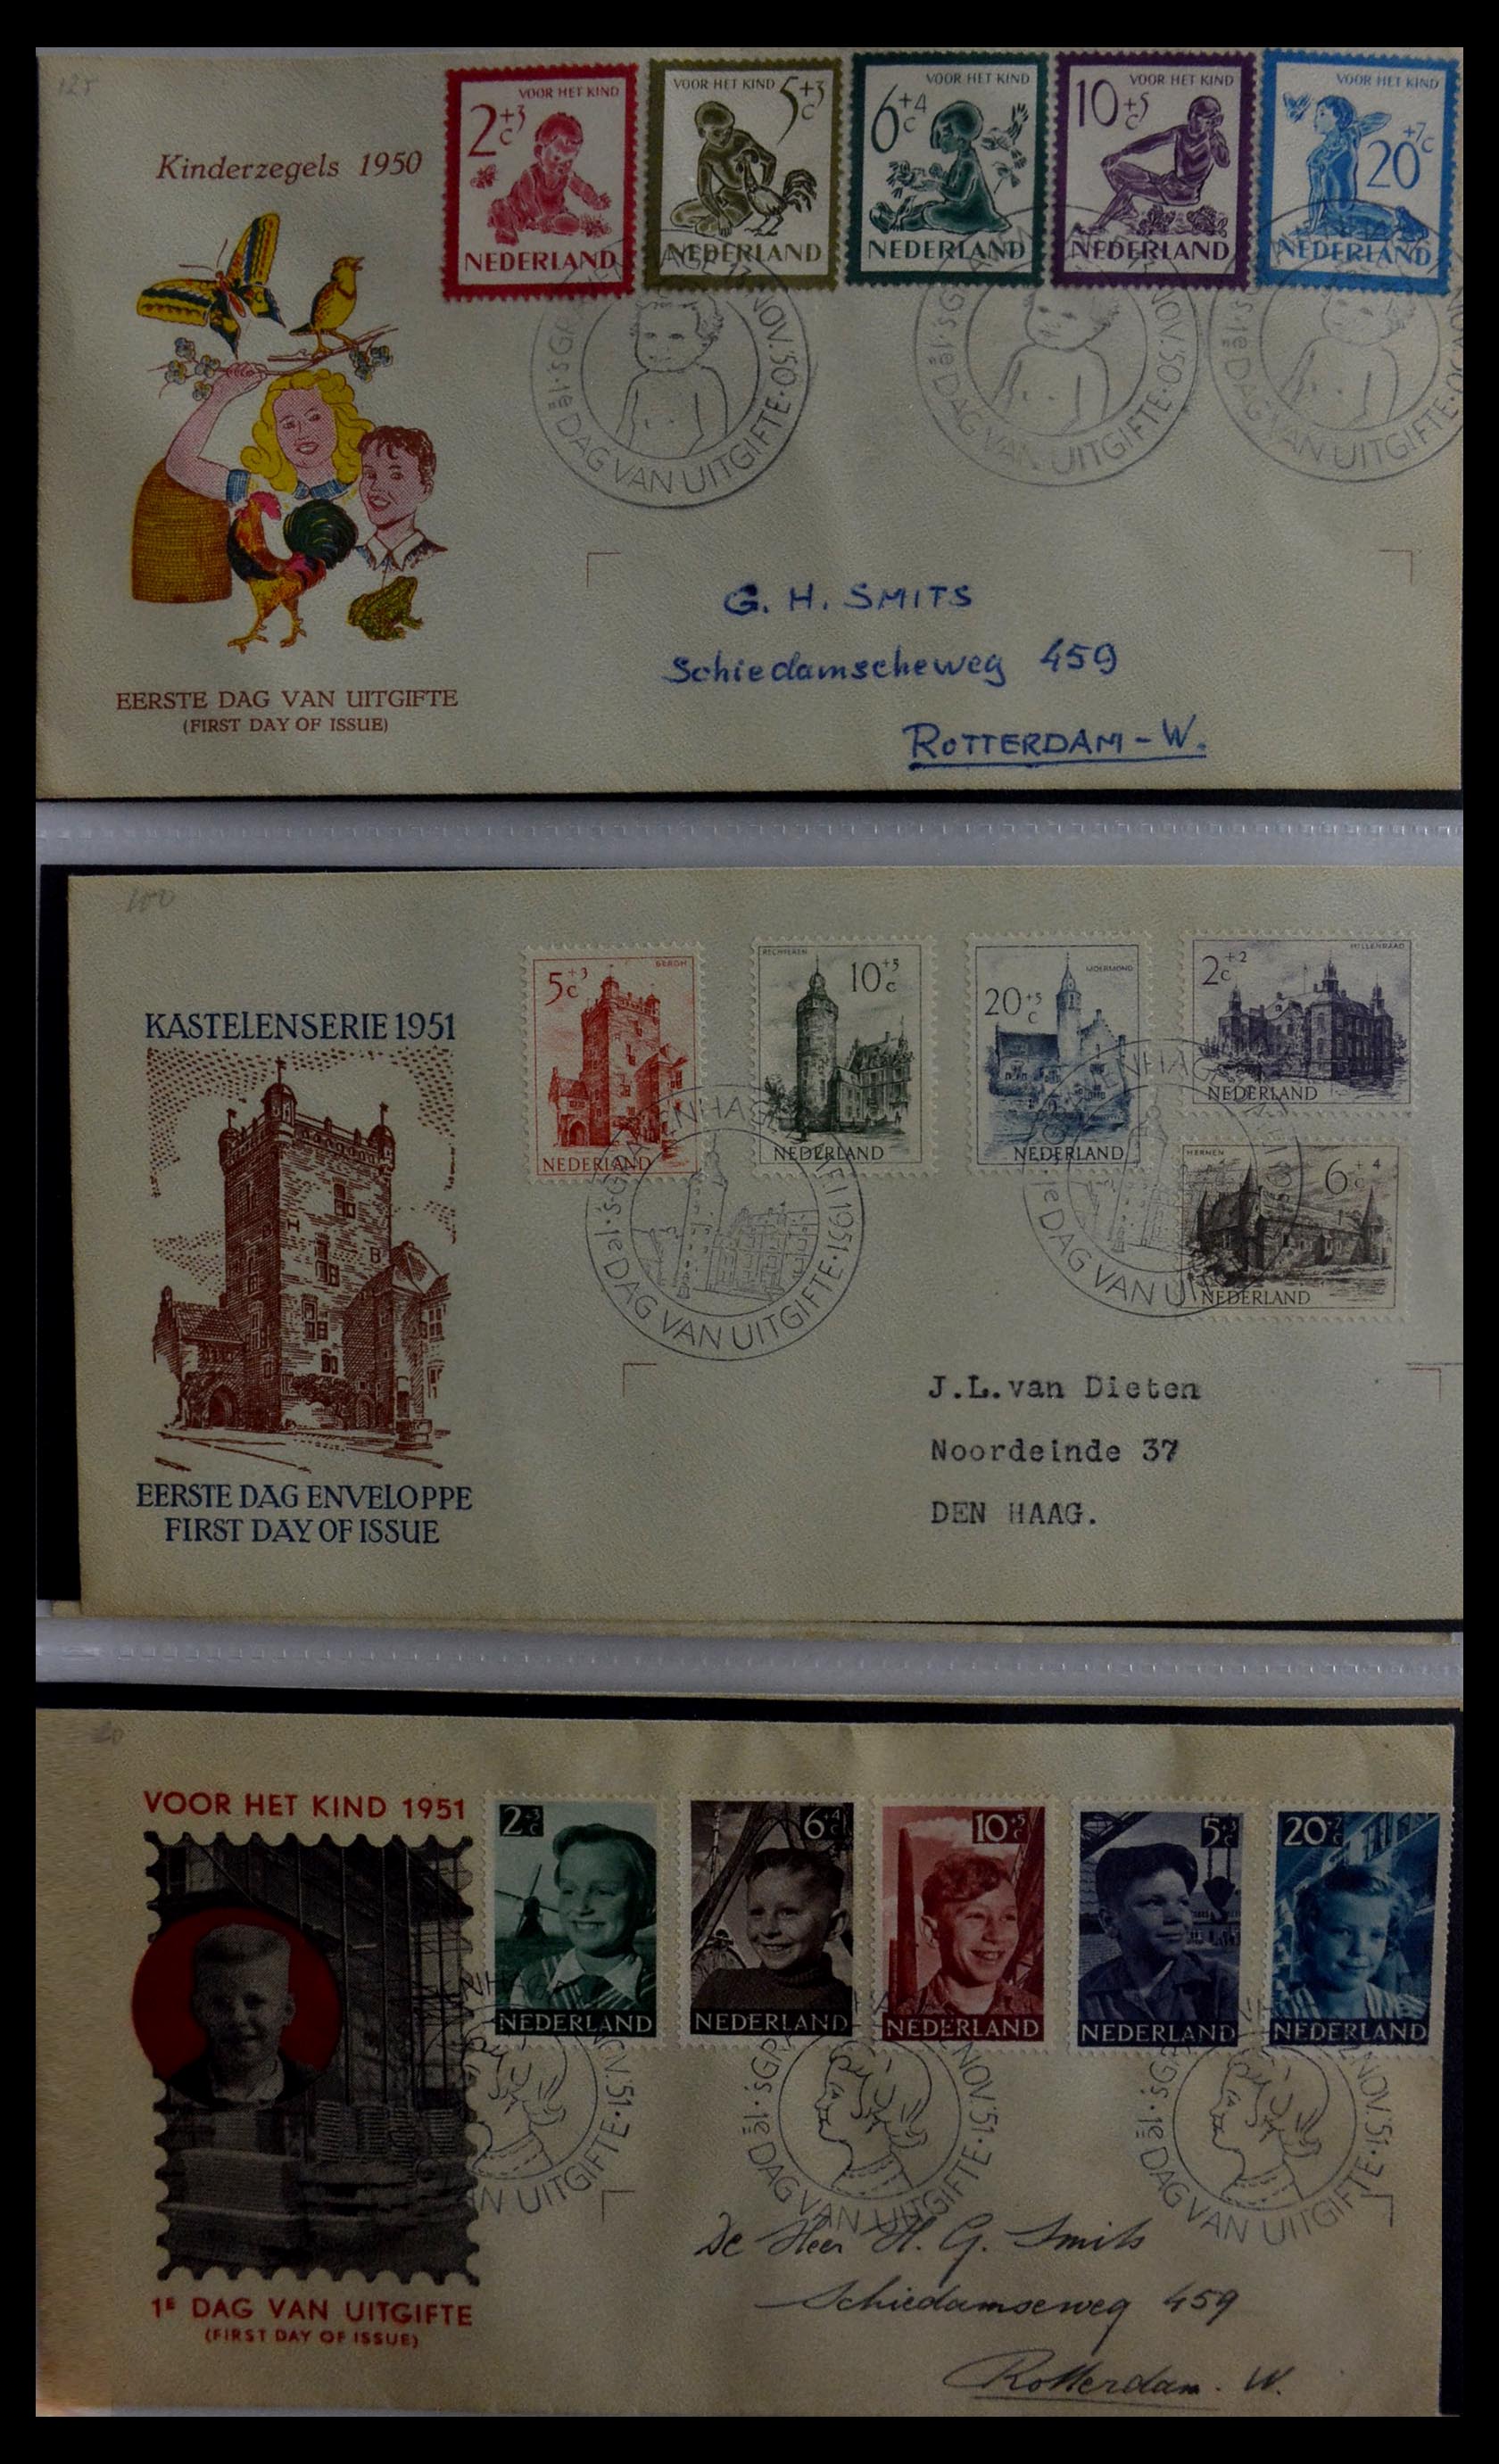 28929 002 - 28929 Netherlands FDC's 1950-1959.